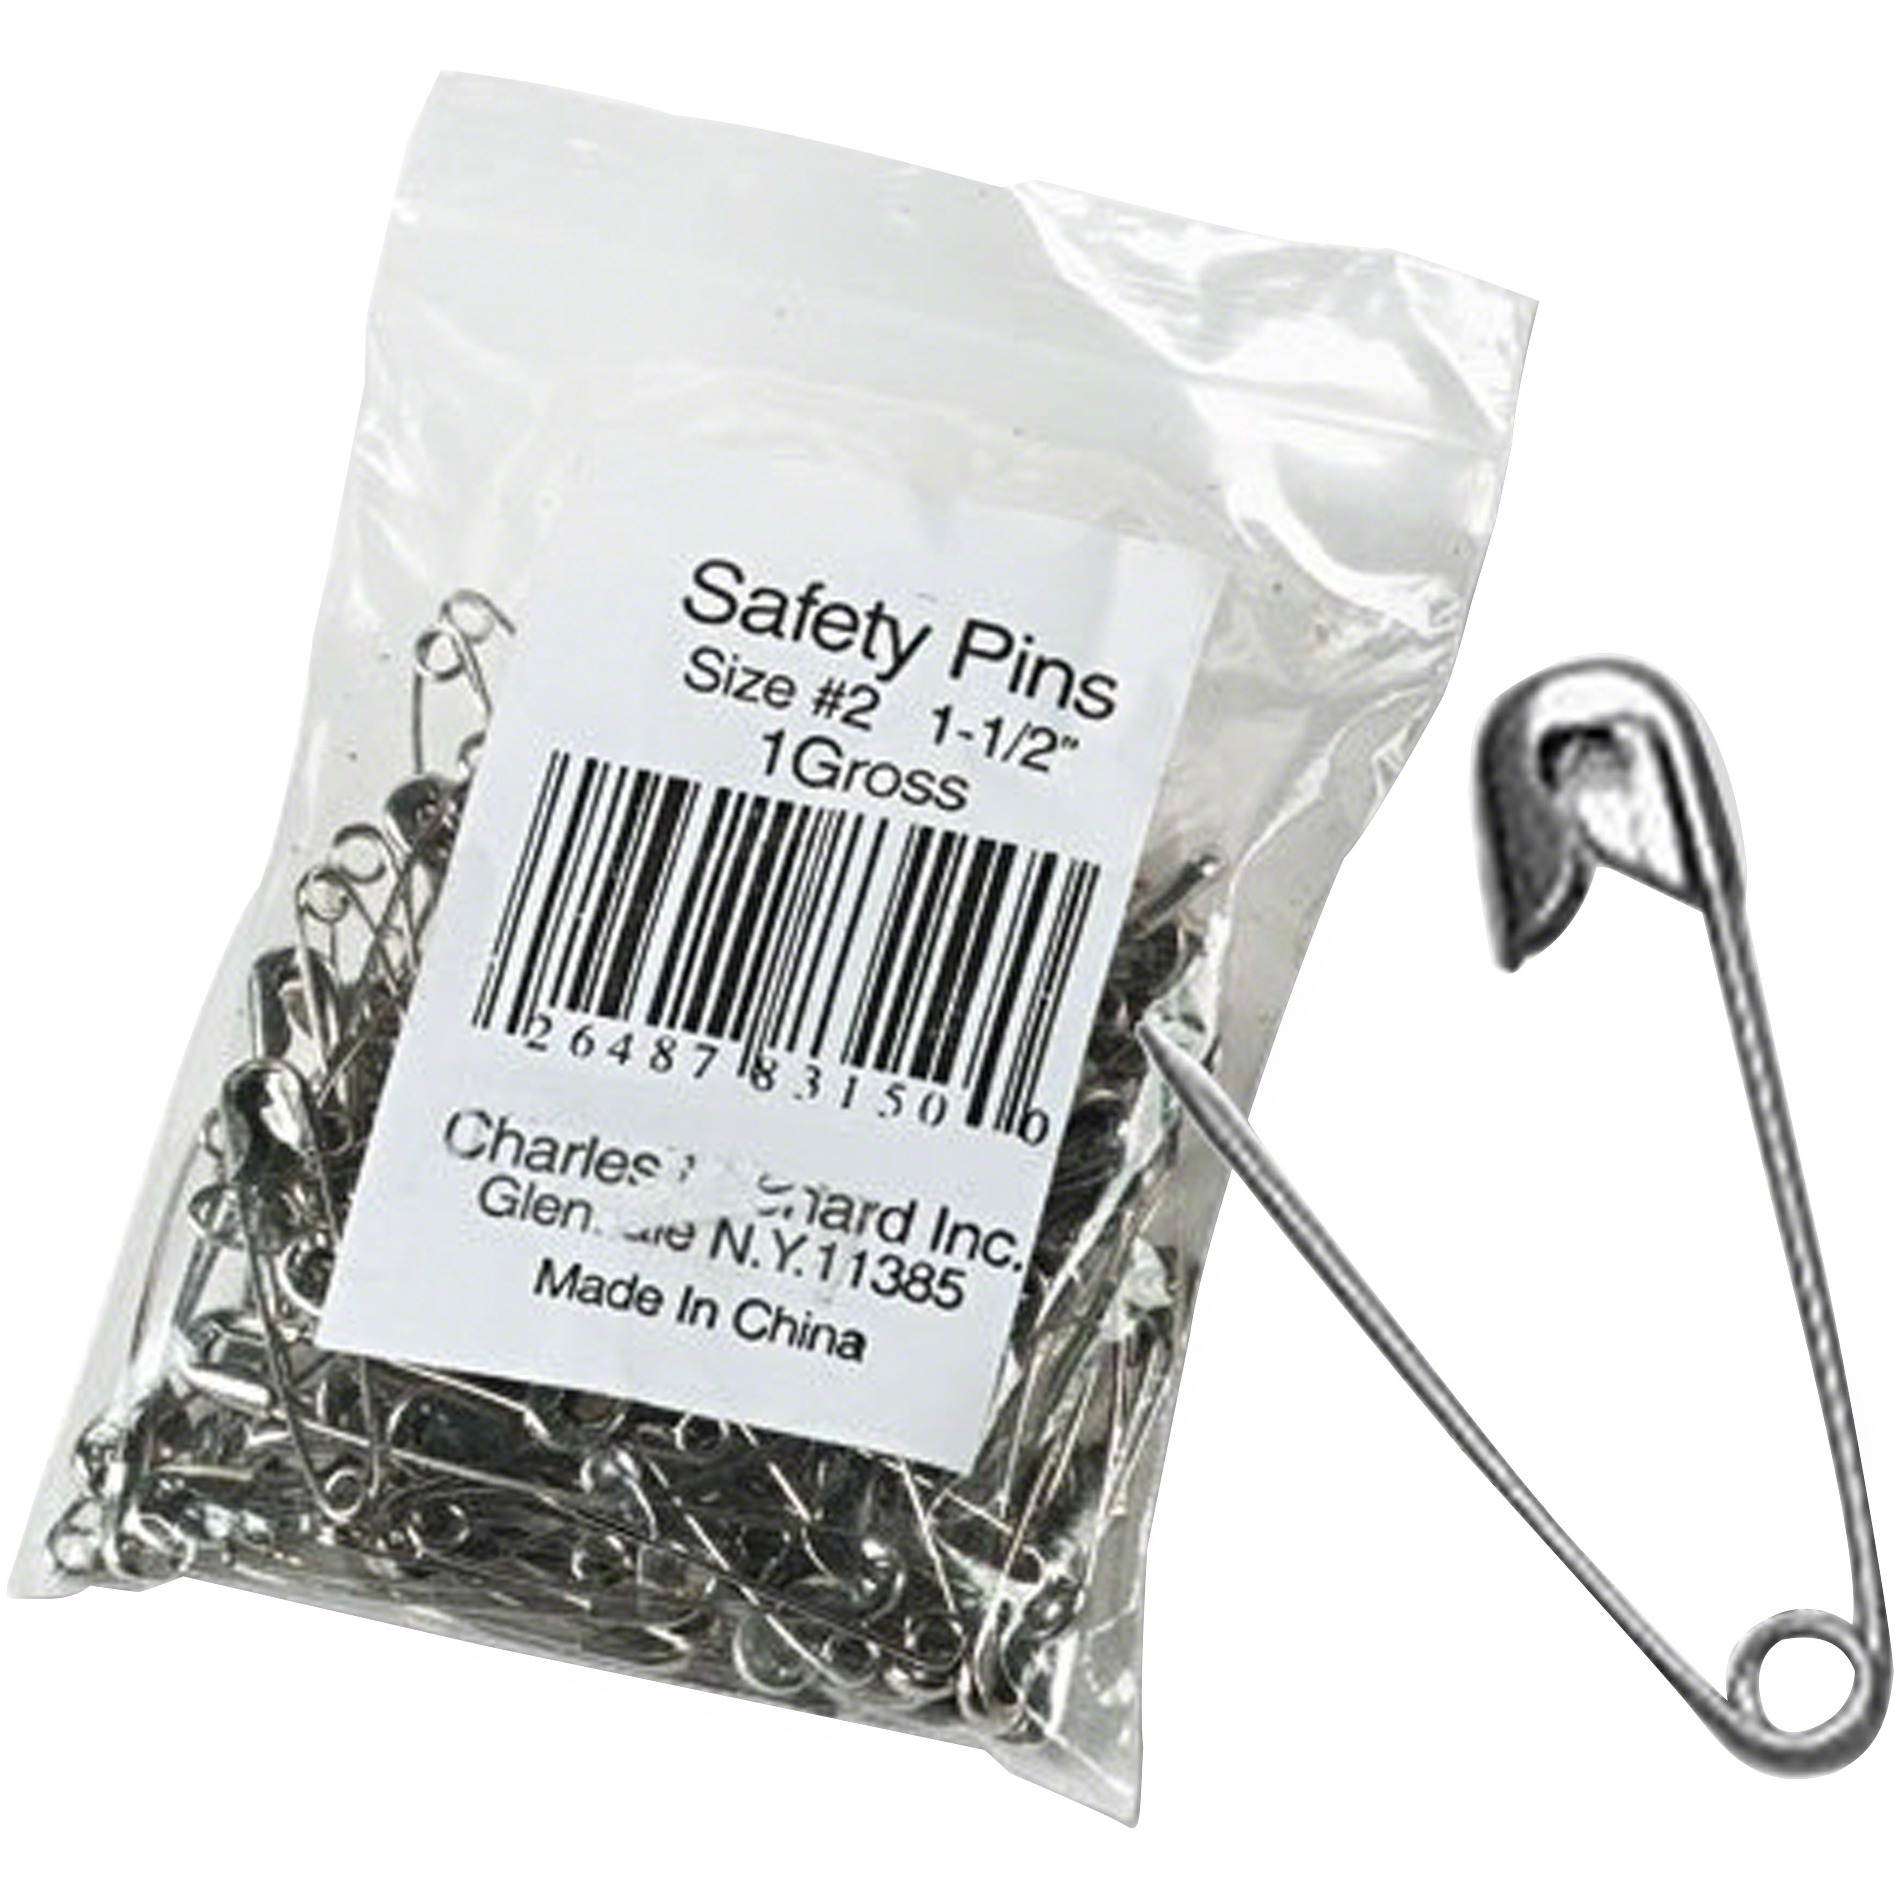 CLI, LEO83150, Safety Pins, 144 / Pack, Silver - image 1 of 2